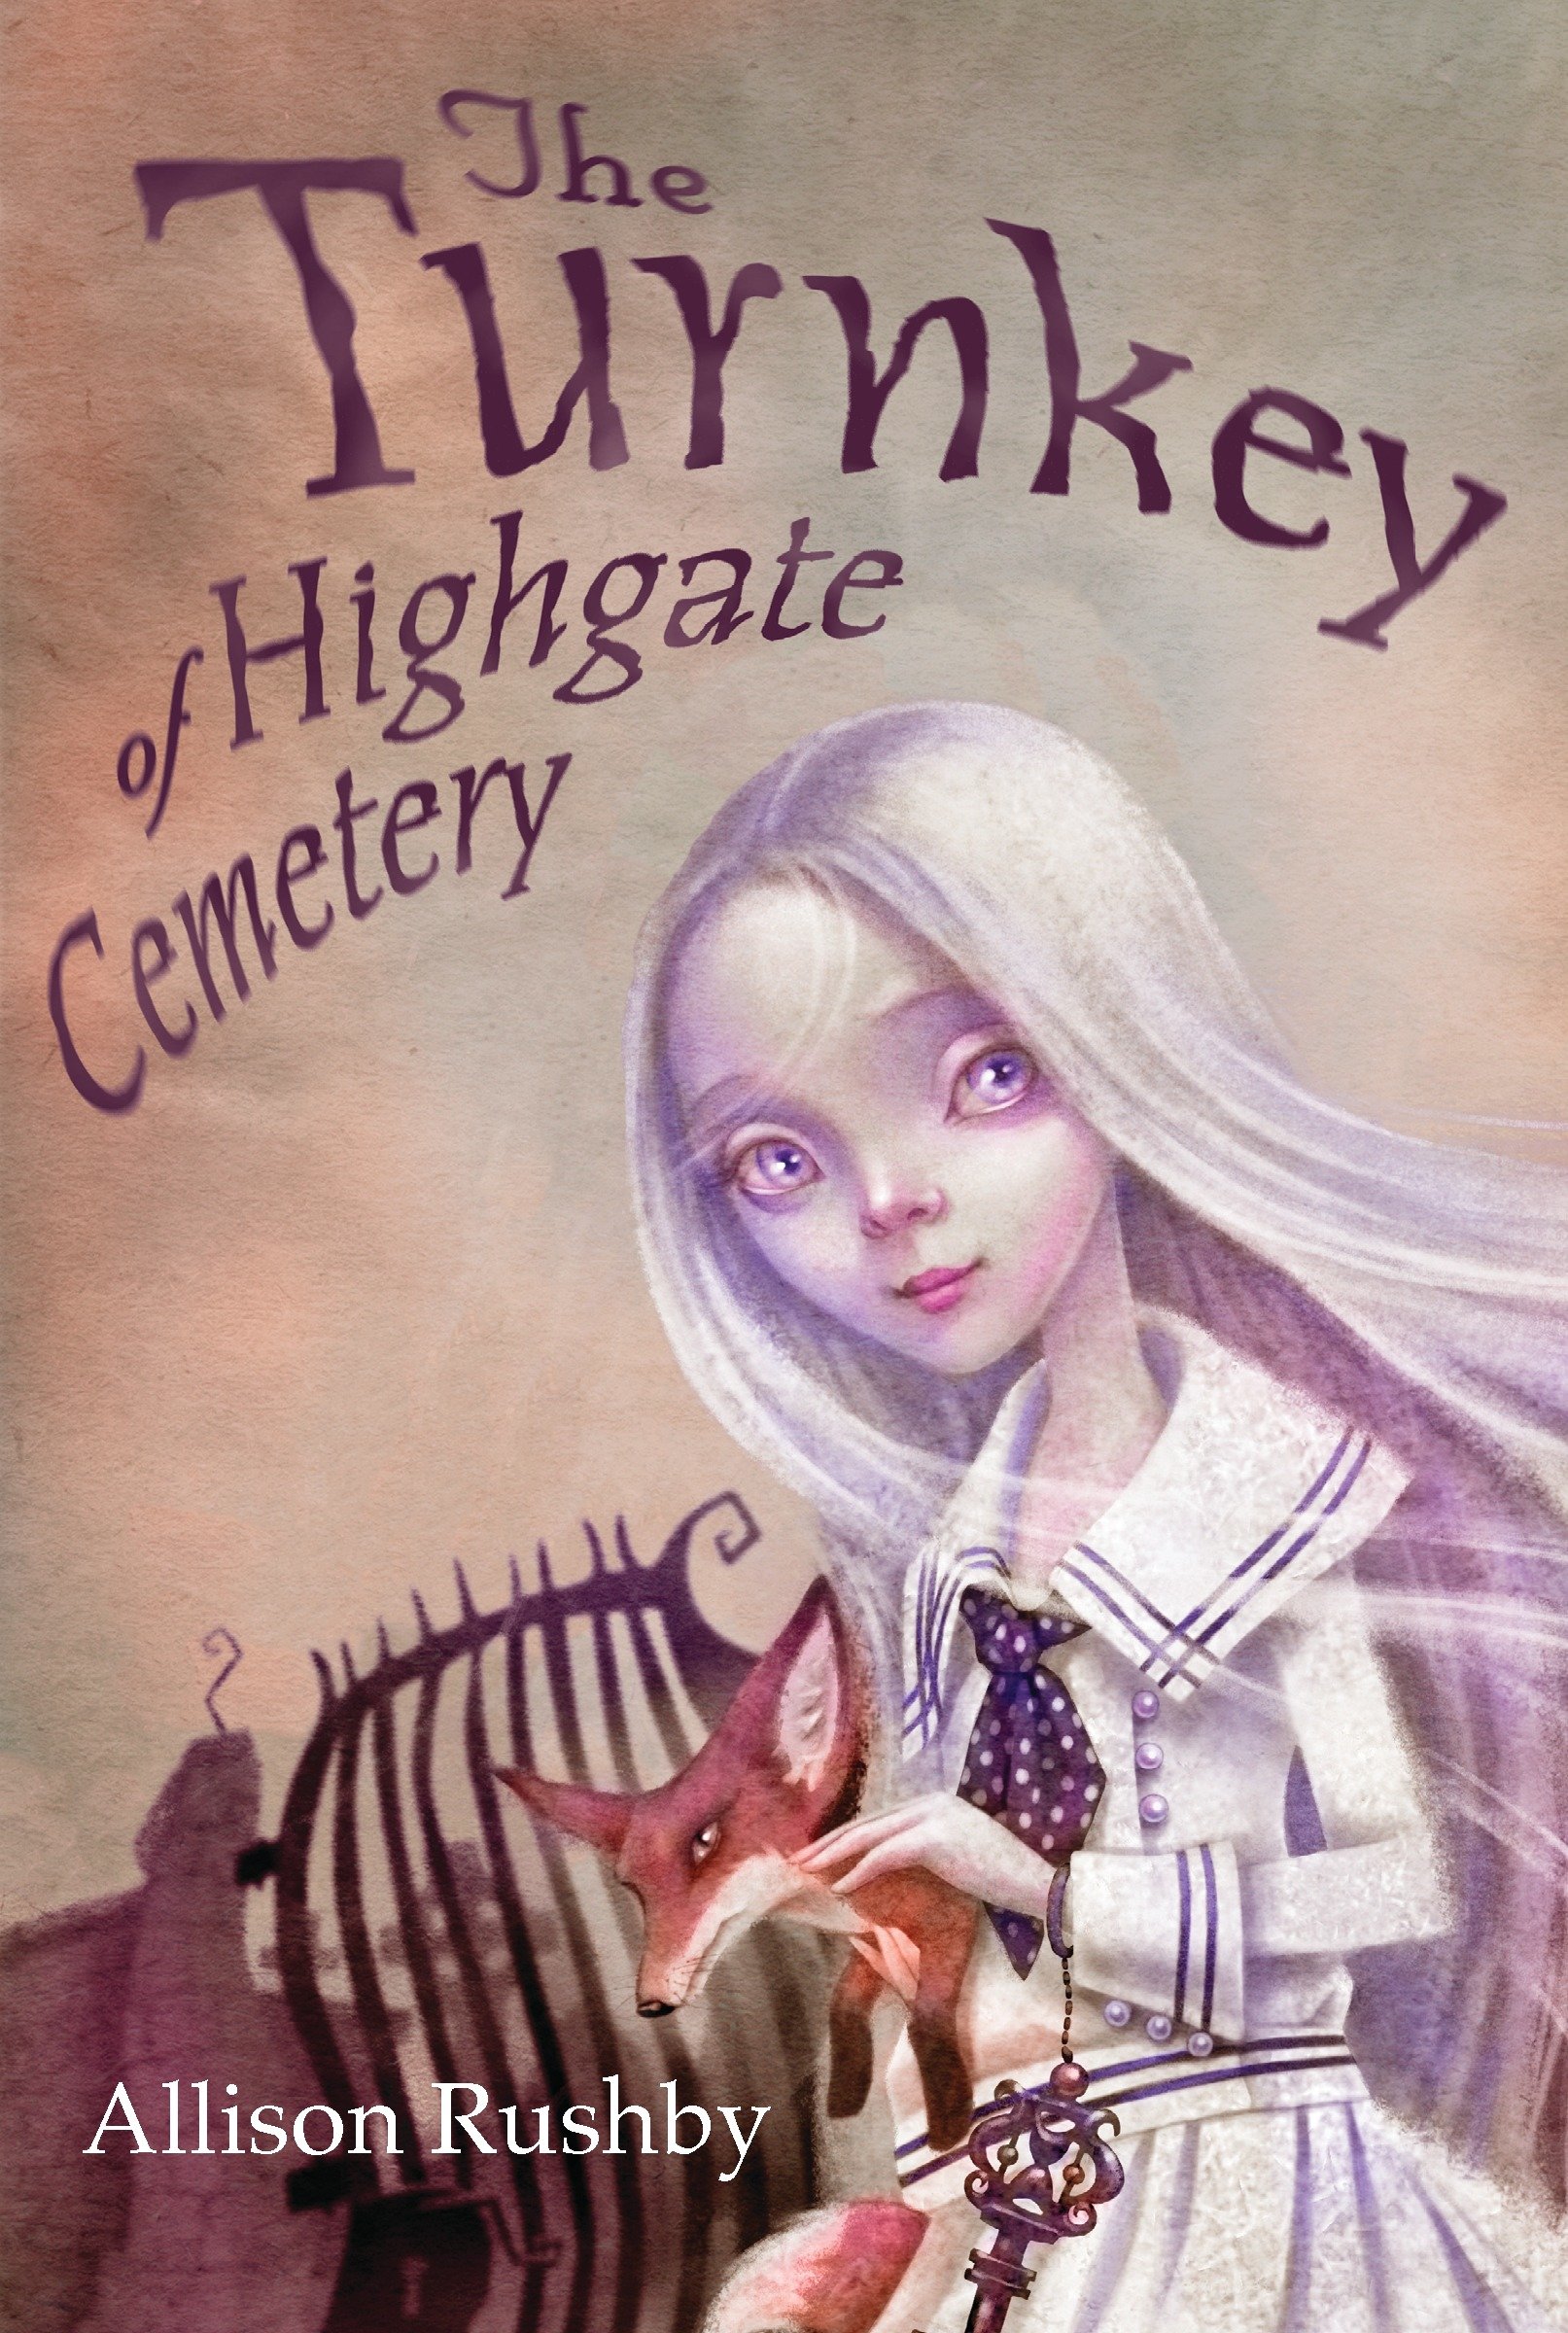 The Turnkey Of Highgate Cemetery (Hardcover Book)